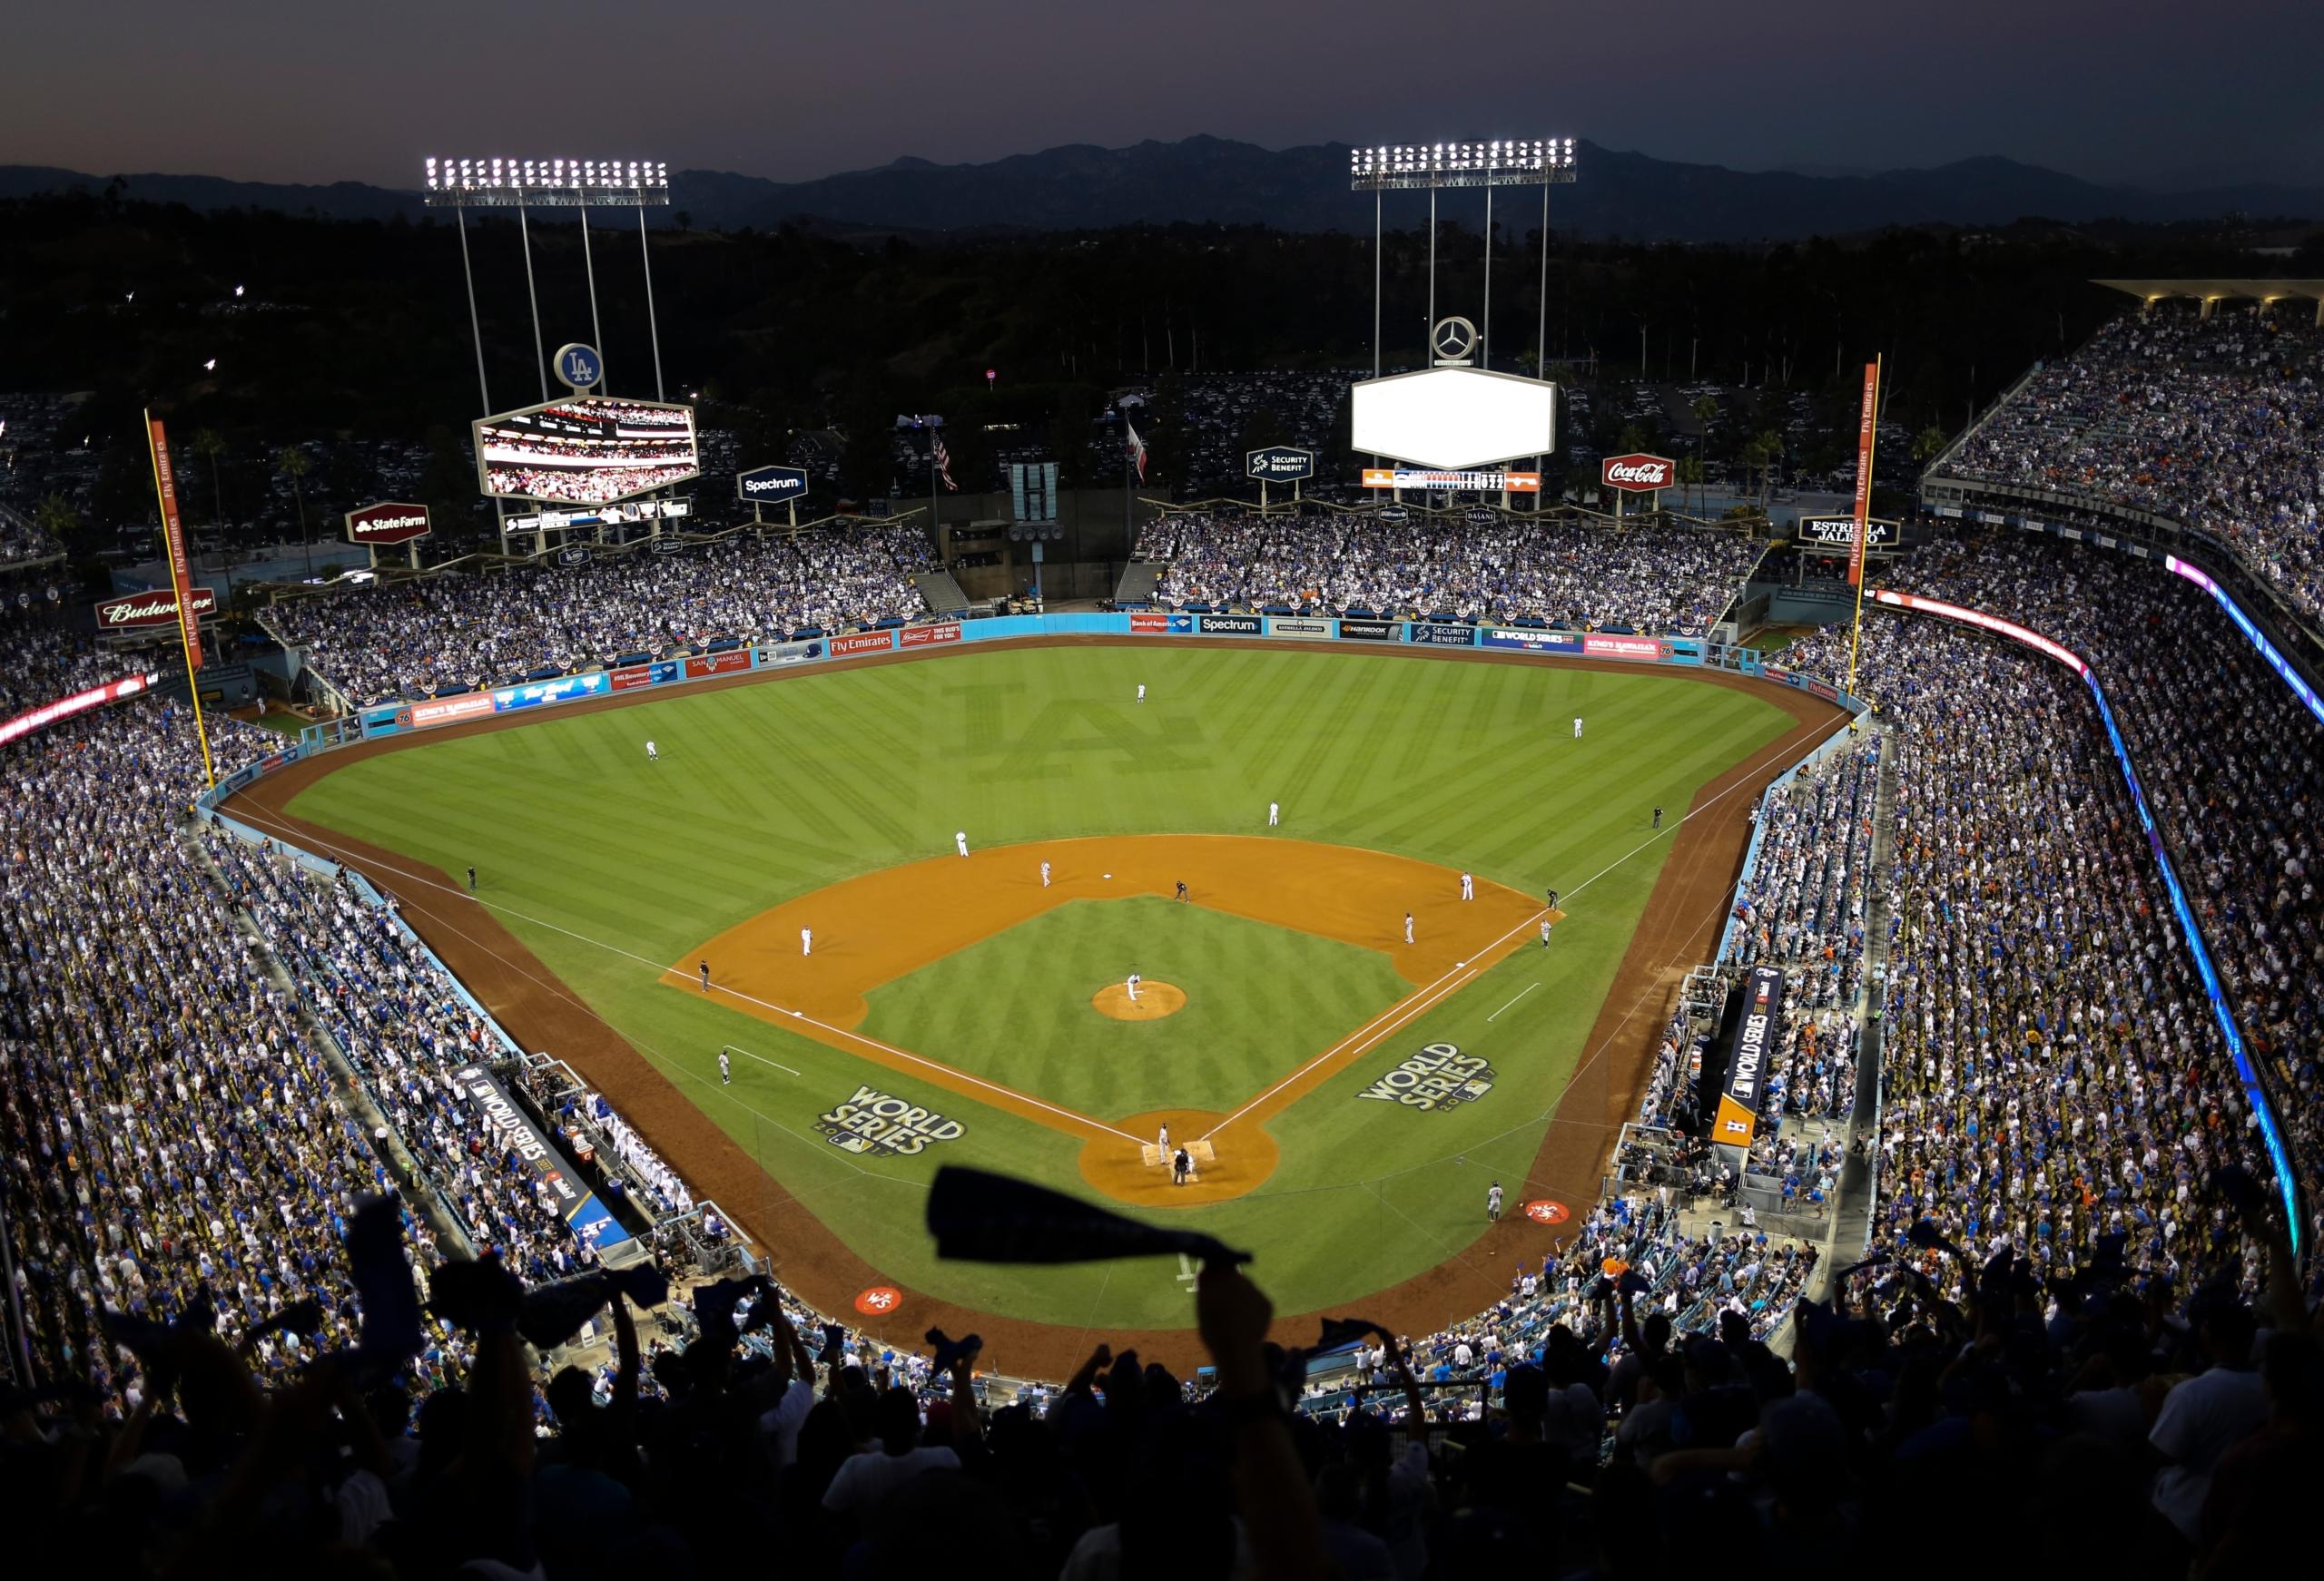 Dodger Stadium’s 40-year wait to host the All-Star Game is going to last even longer. The game scheduled for July 14 was canceled Friday, July 3, 2020, because of the coronavirus pandemic, and Dodger Stadium was awarded the 2022 Midsummer Classic.